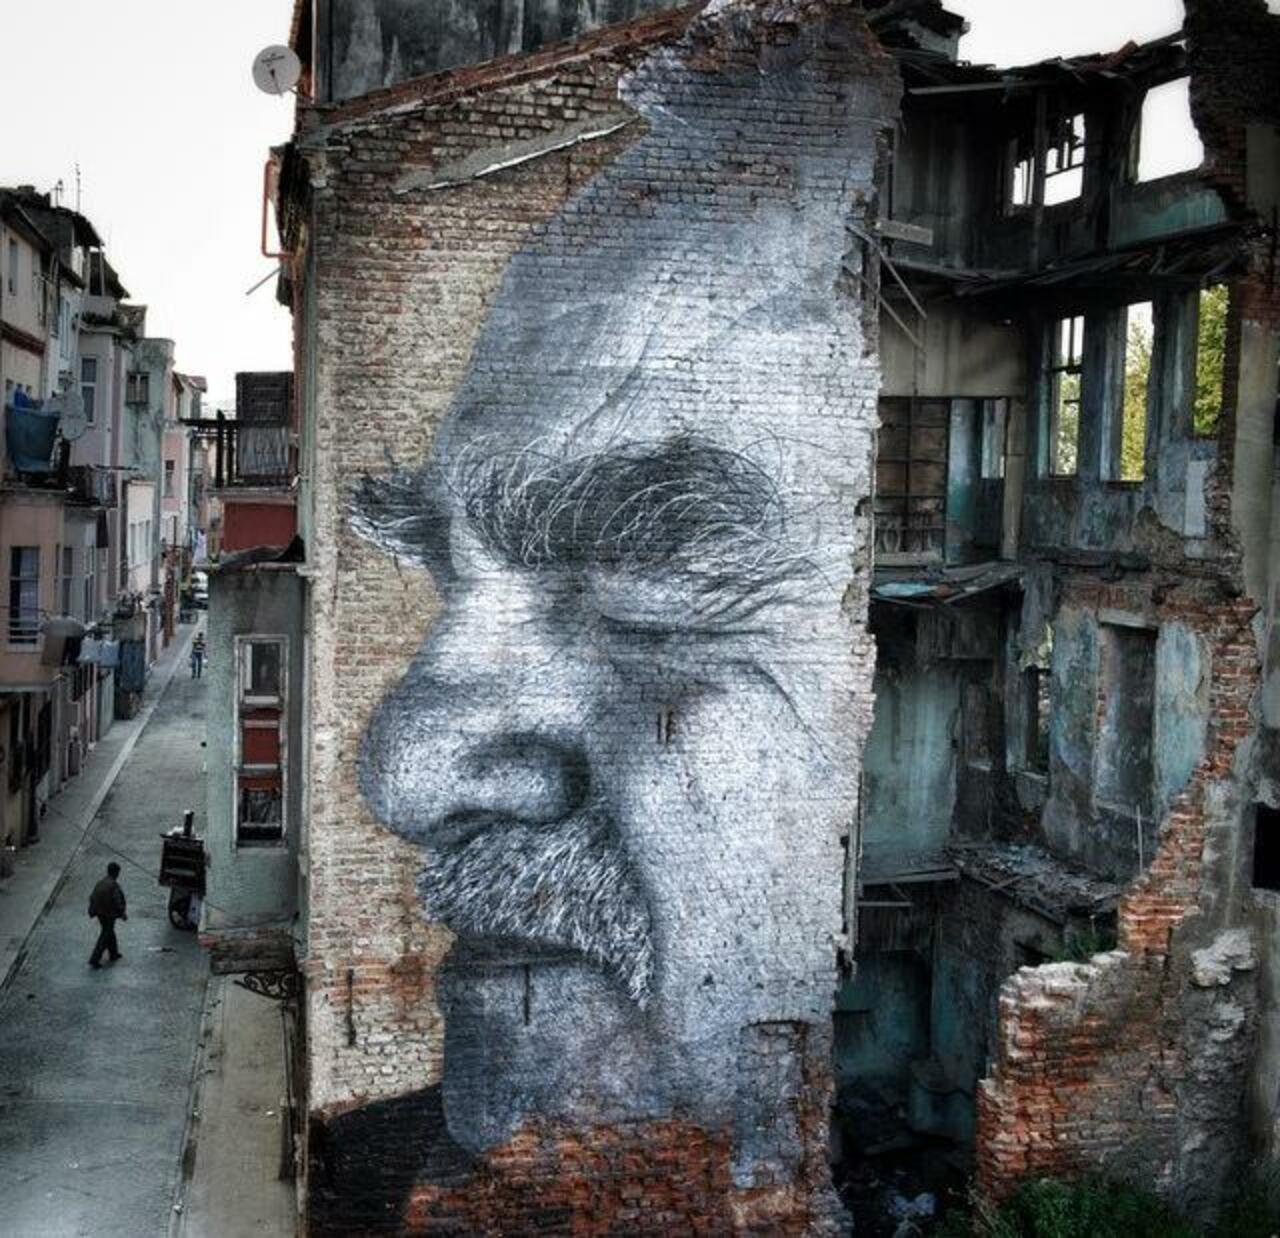 Street Art by JR in Istanbul & after local police painted over it 

#art #arte #graffiti #streetart http://t.co/MBQ8ymVbqN